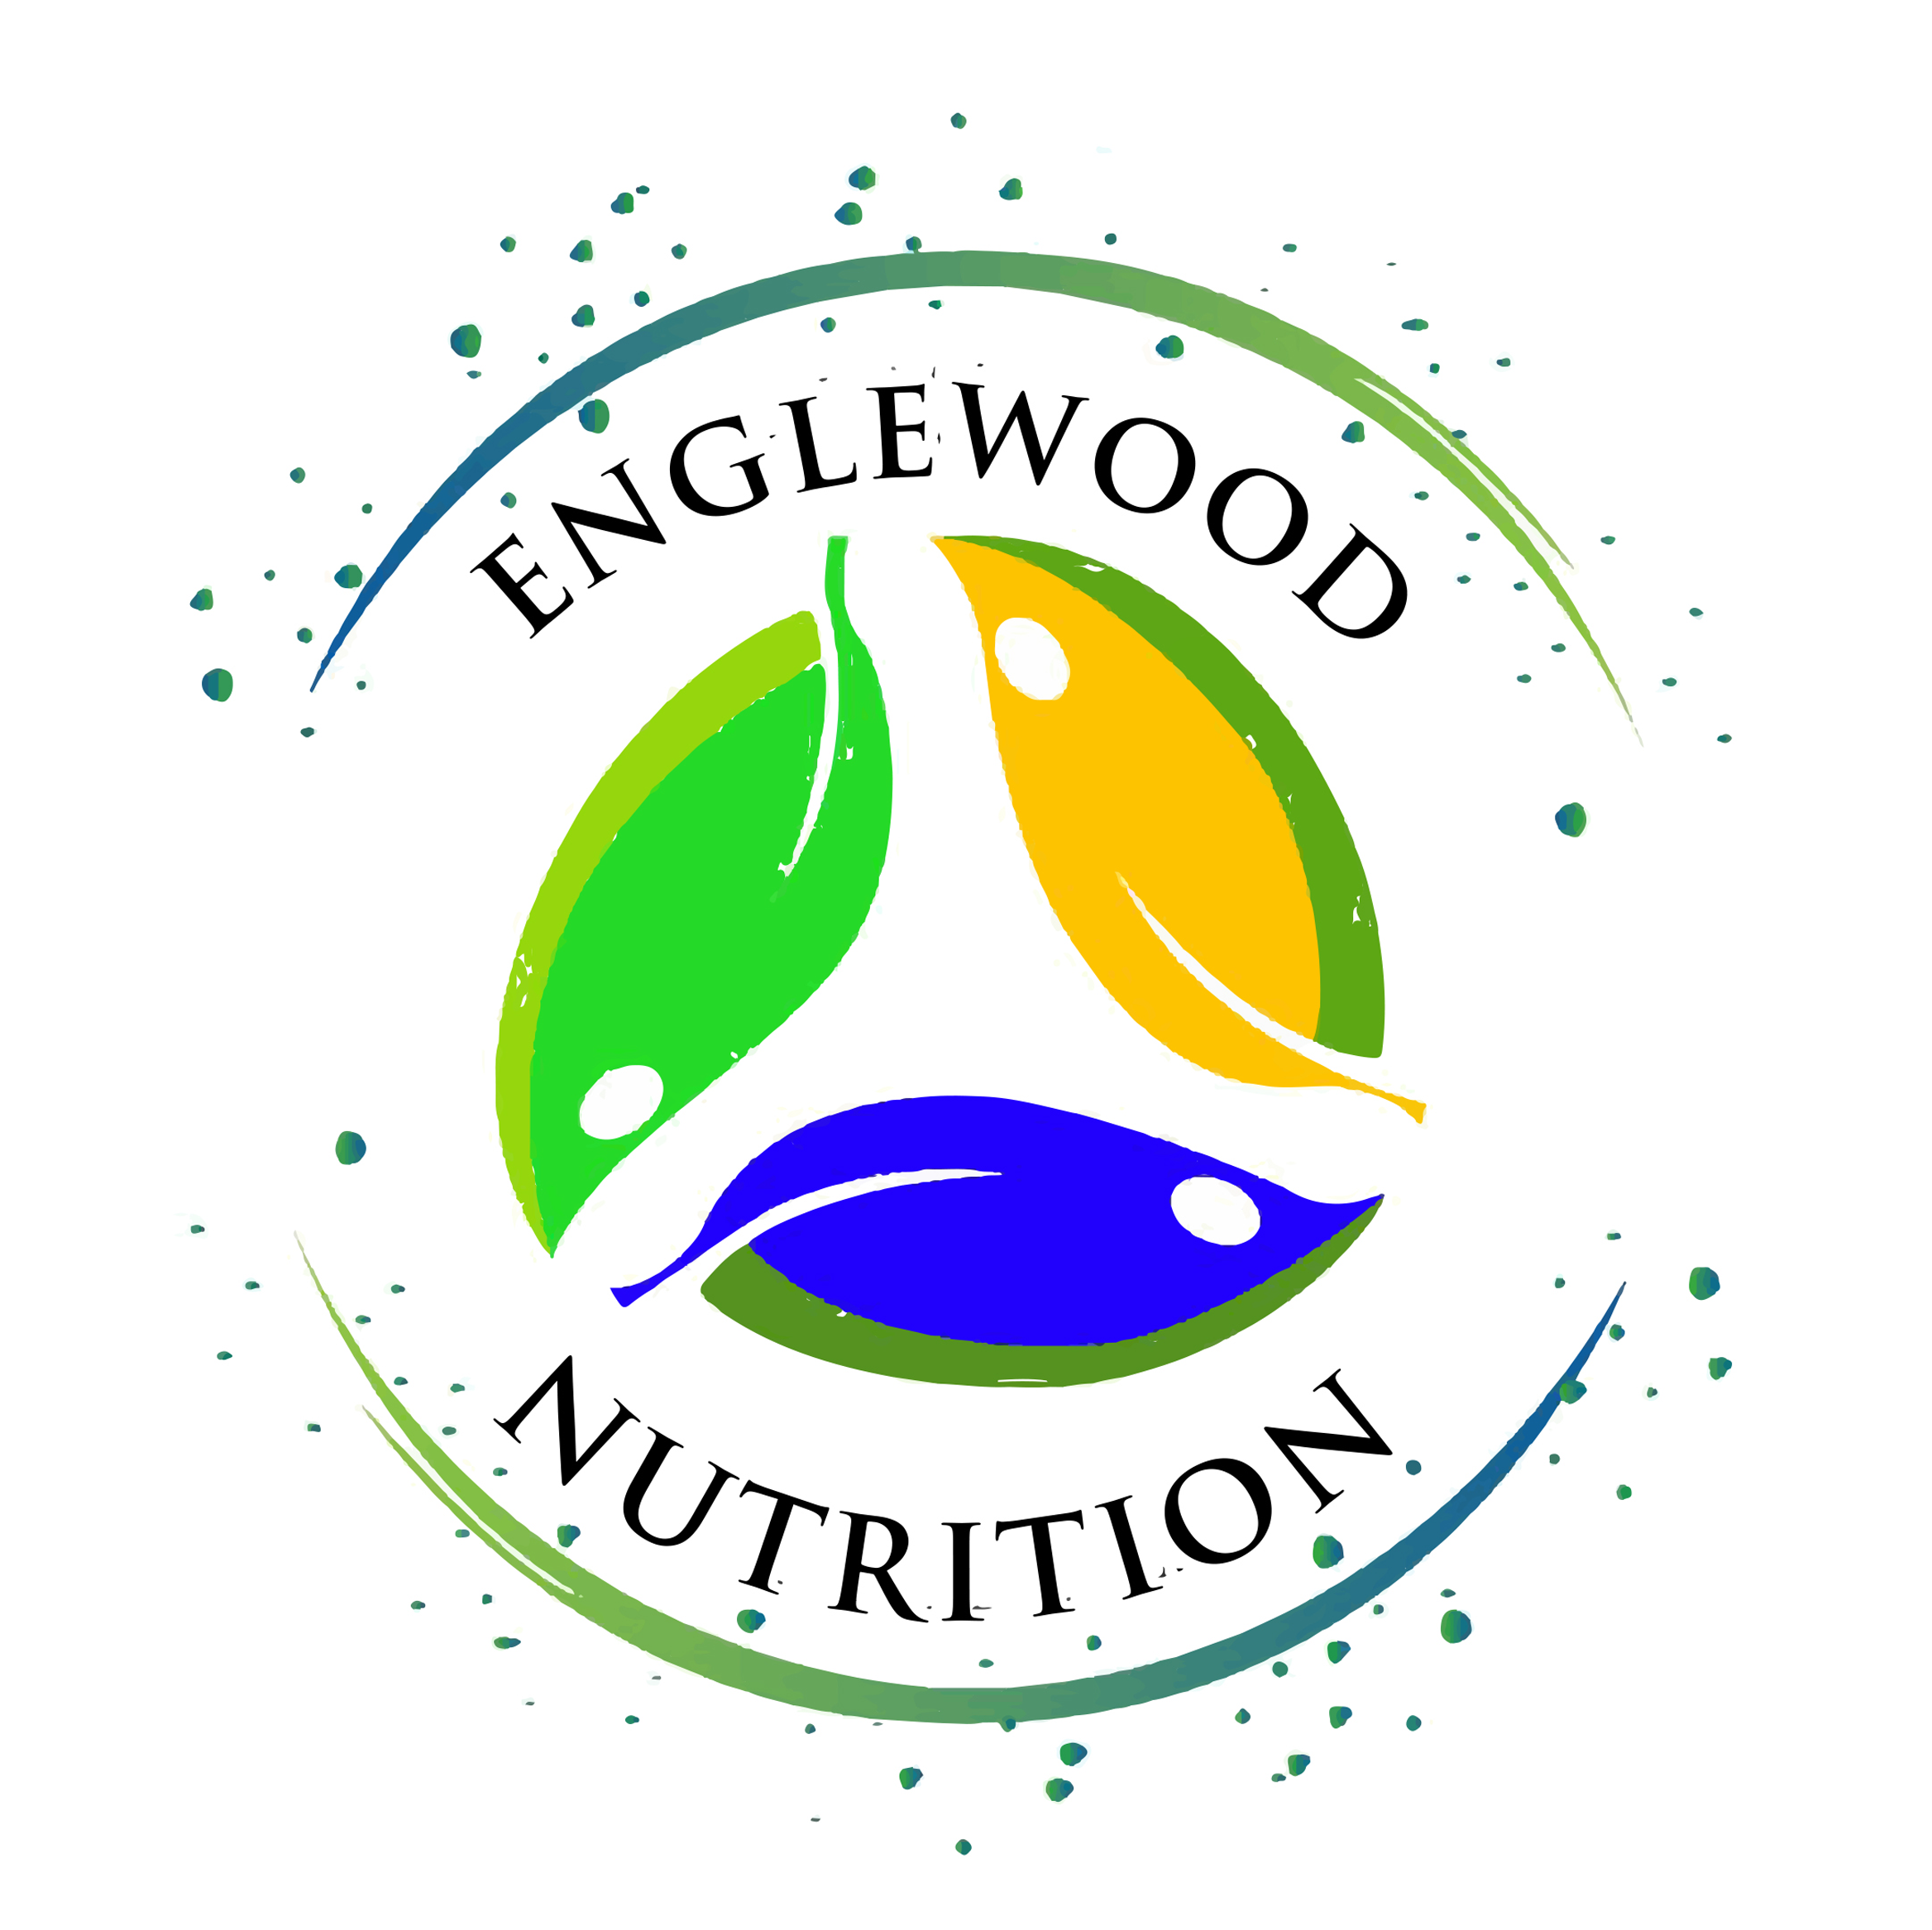 Englewood Nutrition